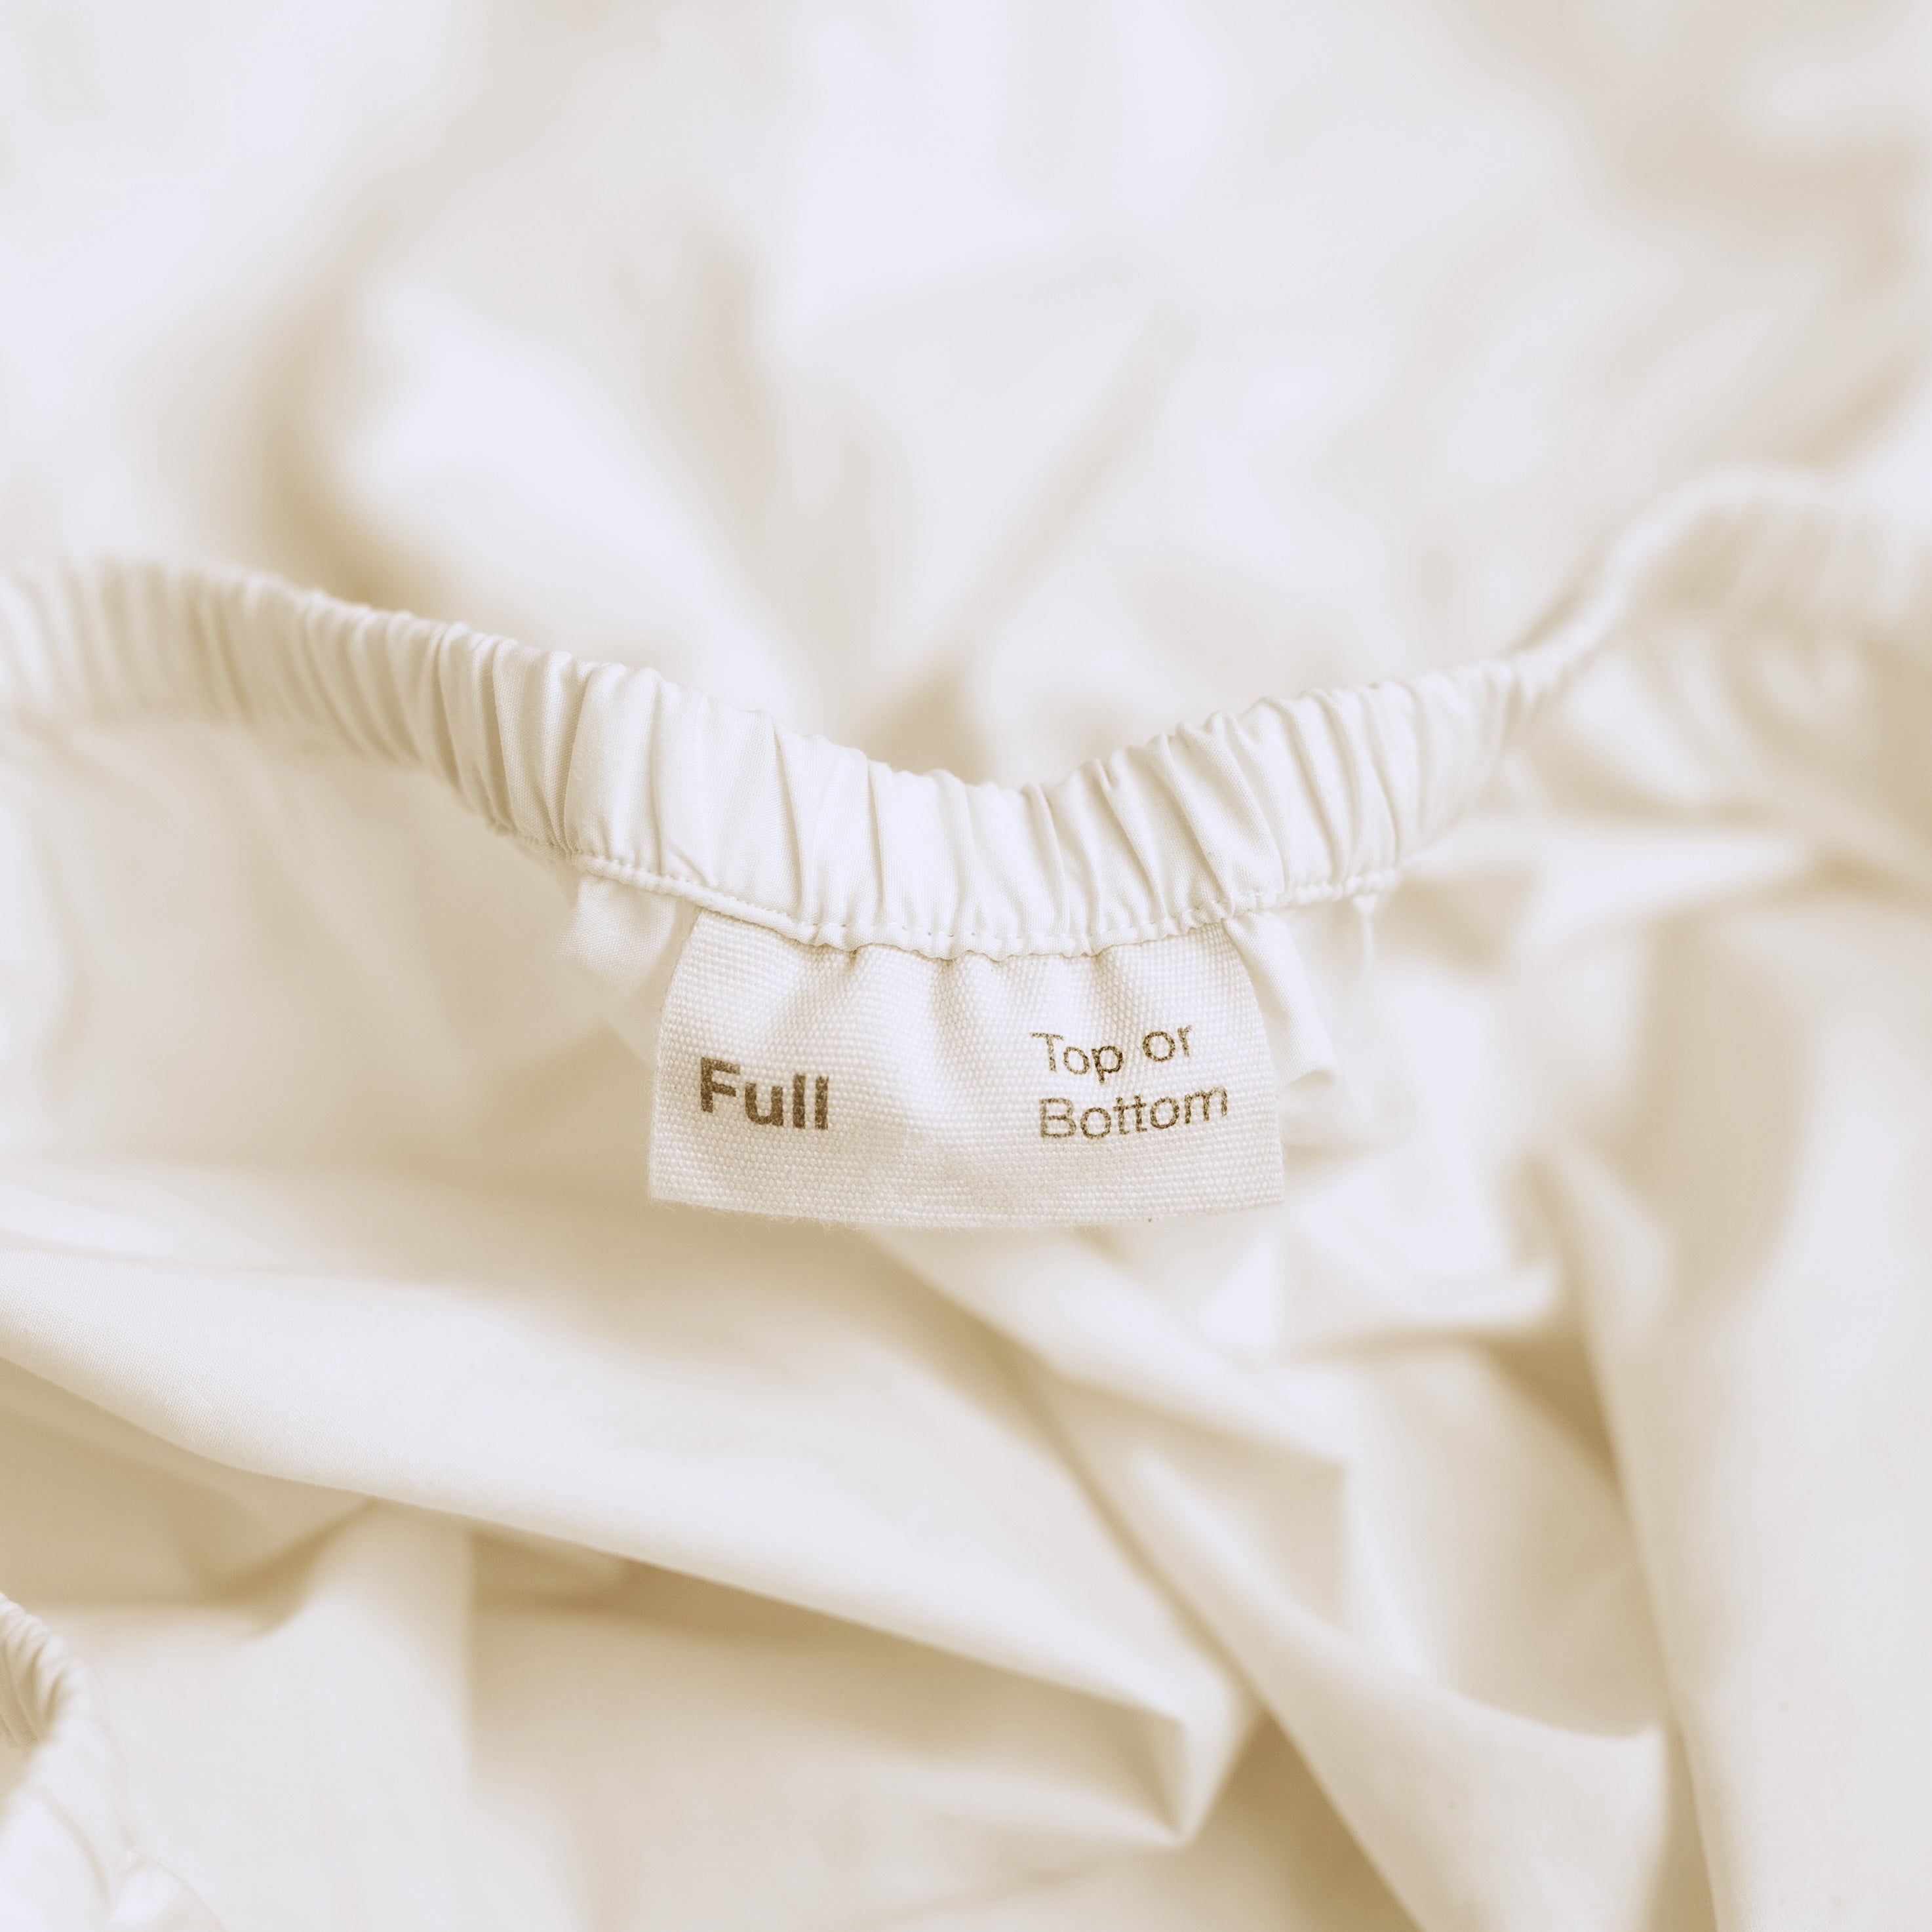 A detail view of the orientation label on an Oolie fitted sheet, indicating &quot;Full&quot; size and marking the &quot;Top or Bottom&quot; of the sheet.